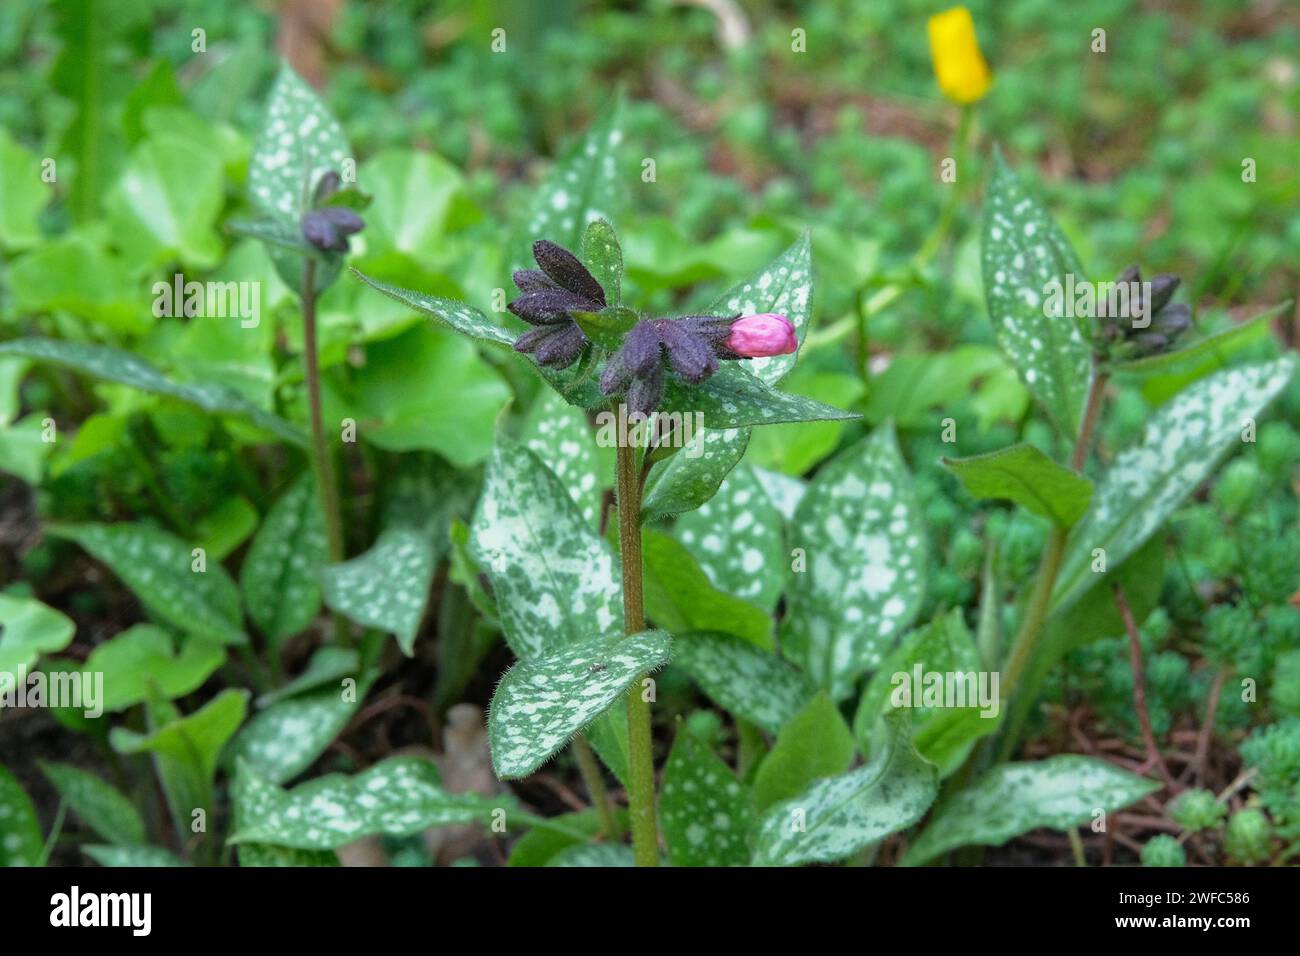 Pulmonaria officinalis. Herbaceous plant with small fragrant flowers of pink, purple or blue color. Medicinal healthy herb. Green meadow. Stock Photo